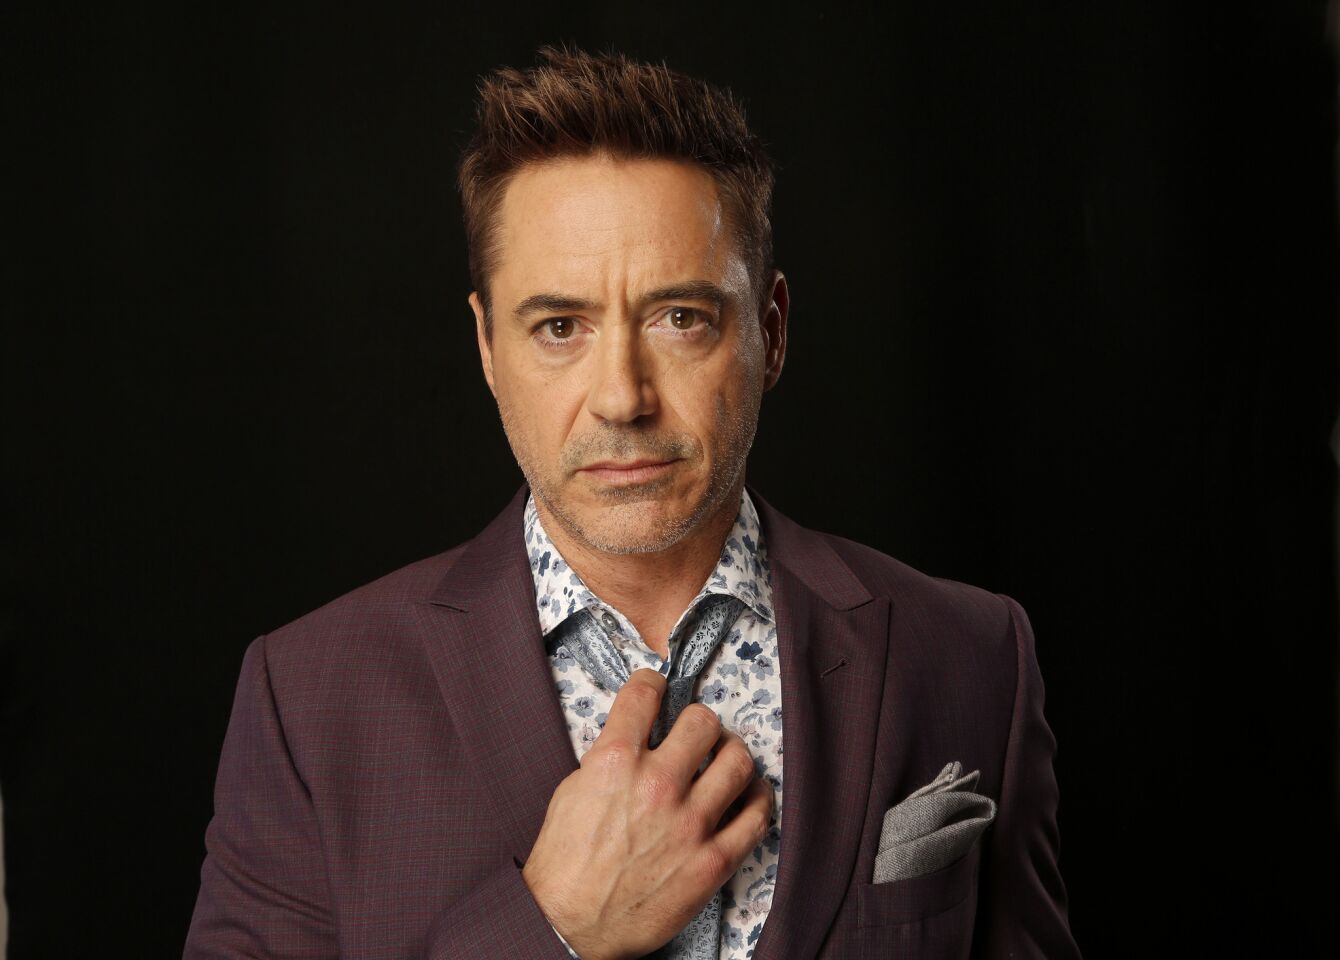 Born in Manhattan on April 4, 1965, Downey is the son of underground filmmaker Robert Downey Sr. He made his film debut in his father's 1970 film, "Pound," when he was 5 years old.